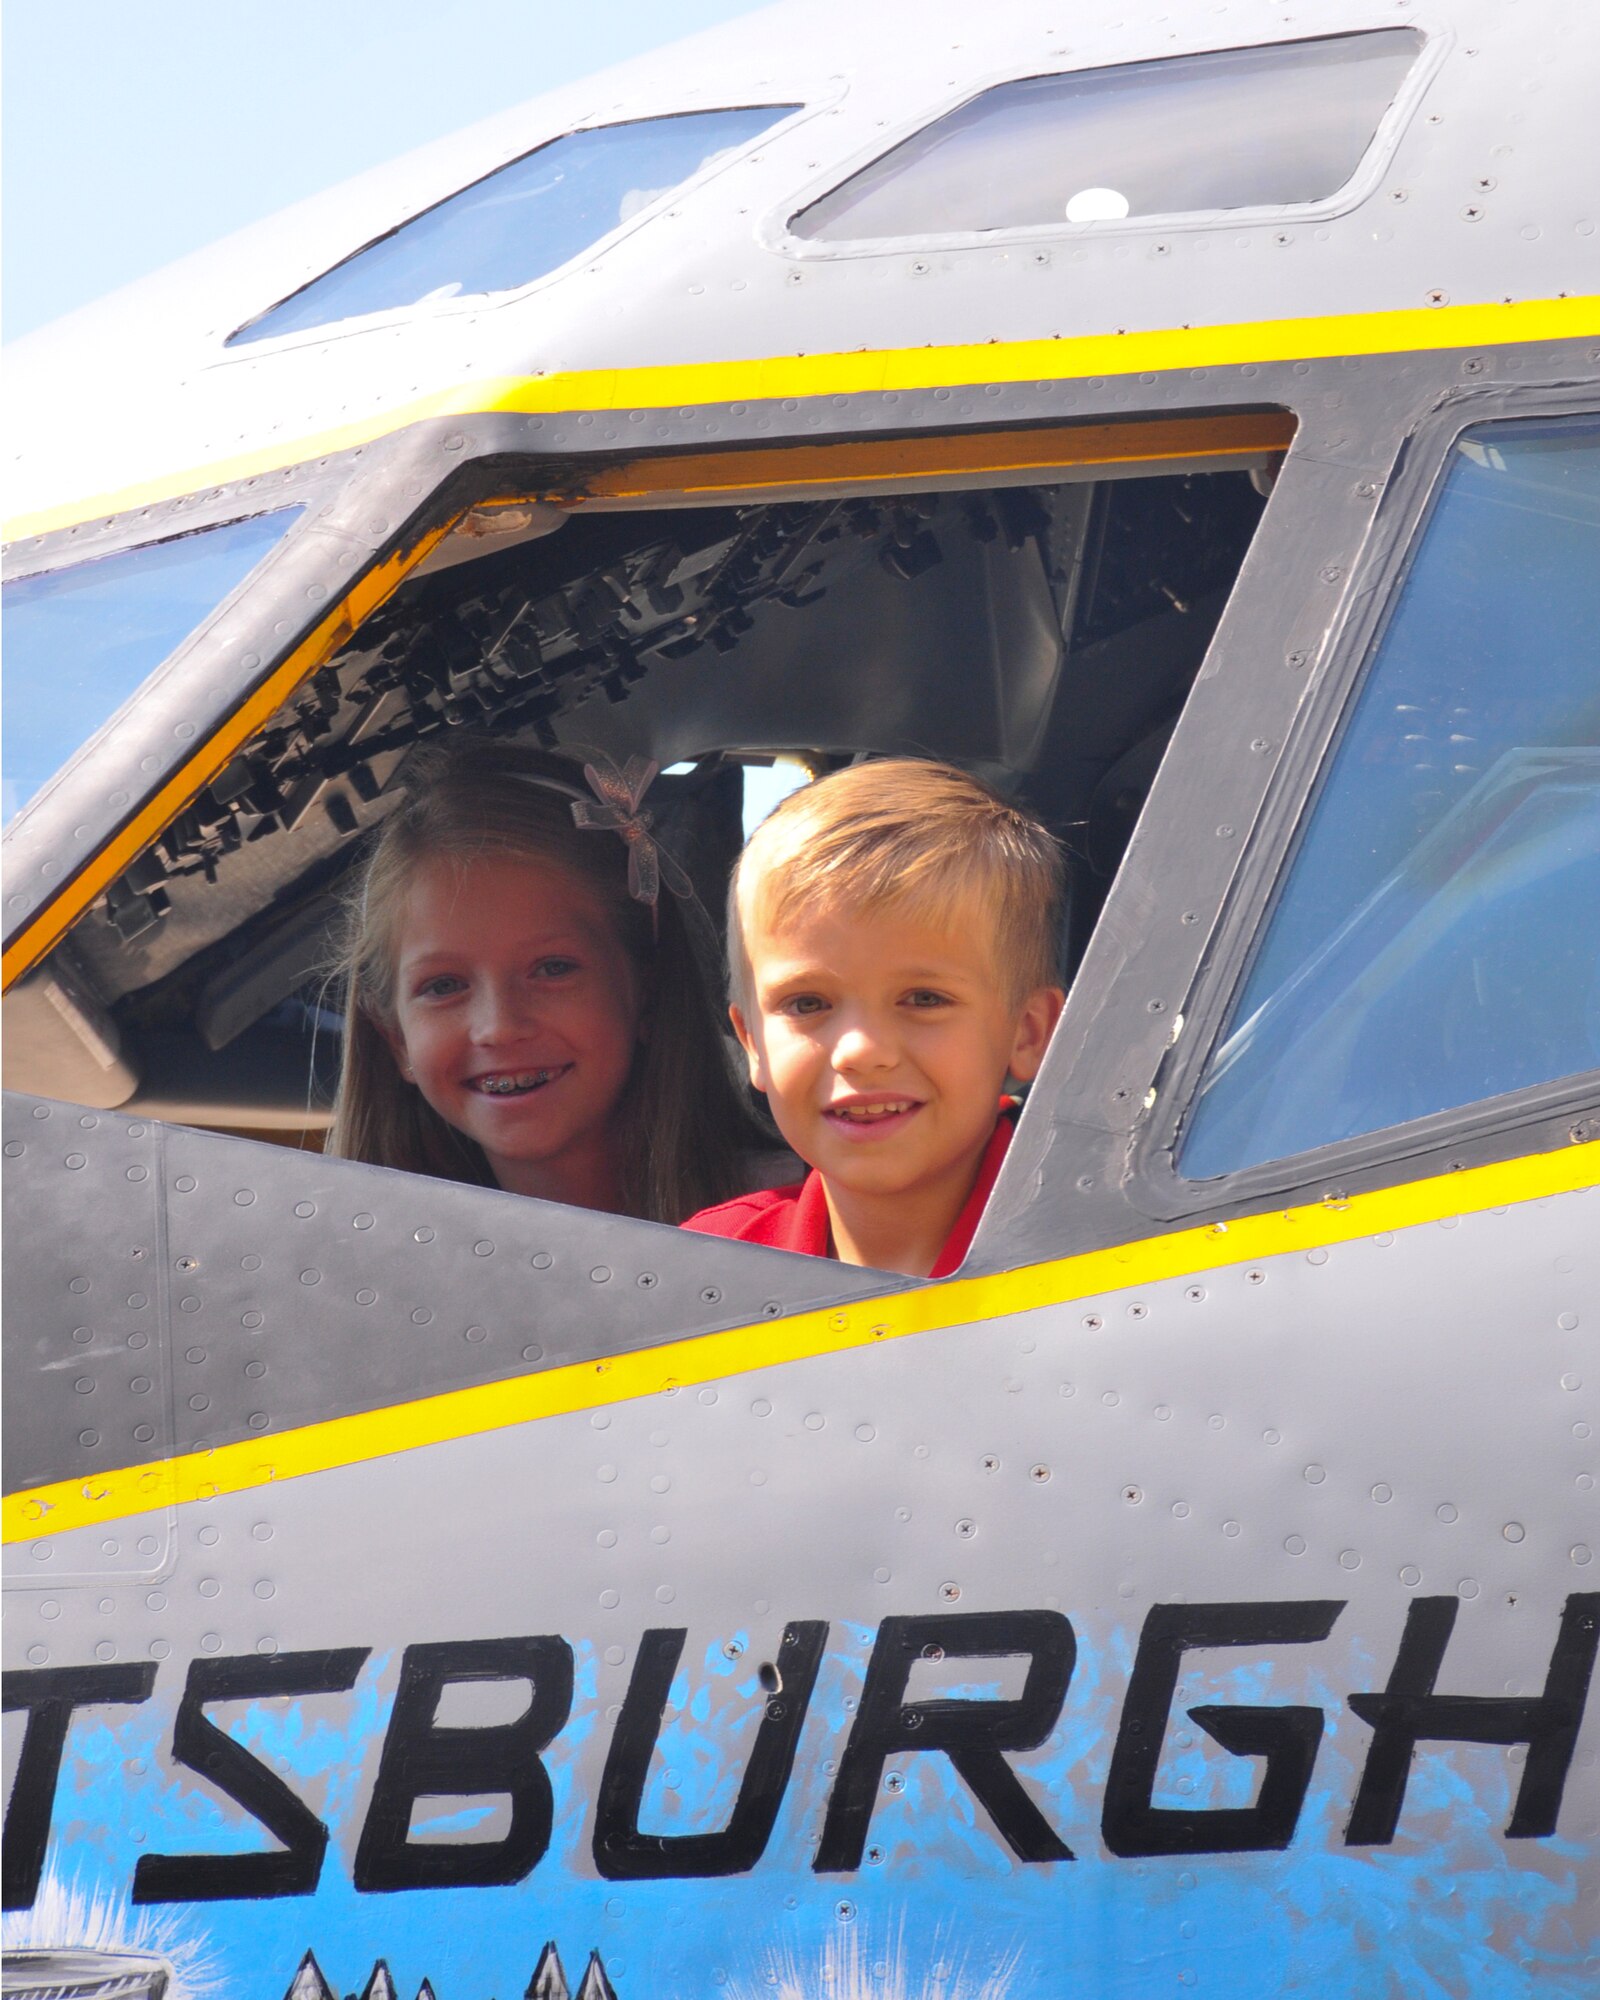 Grace Perez (left) and Henry Perez sit in the cockpit of a KC-135 after the 171st Air Refueling Wing’s Assumption of Command ceremony Coraopolis, Pa. Aug. 2, 2015. The KC-135 was available for touring after the ceremony. (U.S. Air National Guard photo by Staff Sgt. Michael P. Fariss/released)